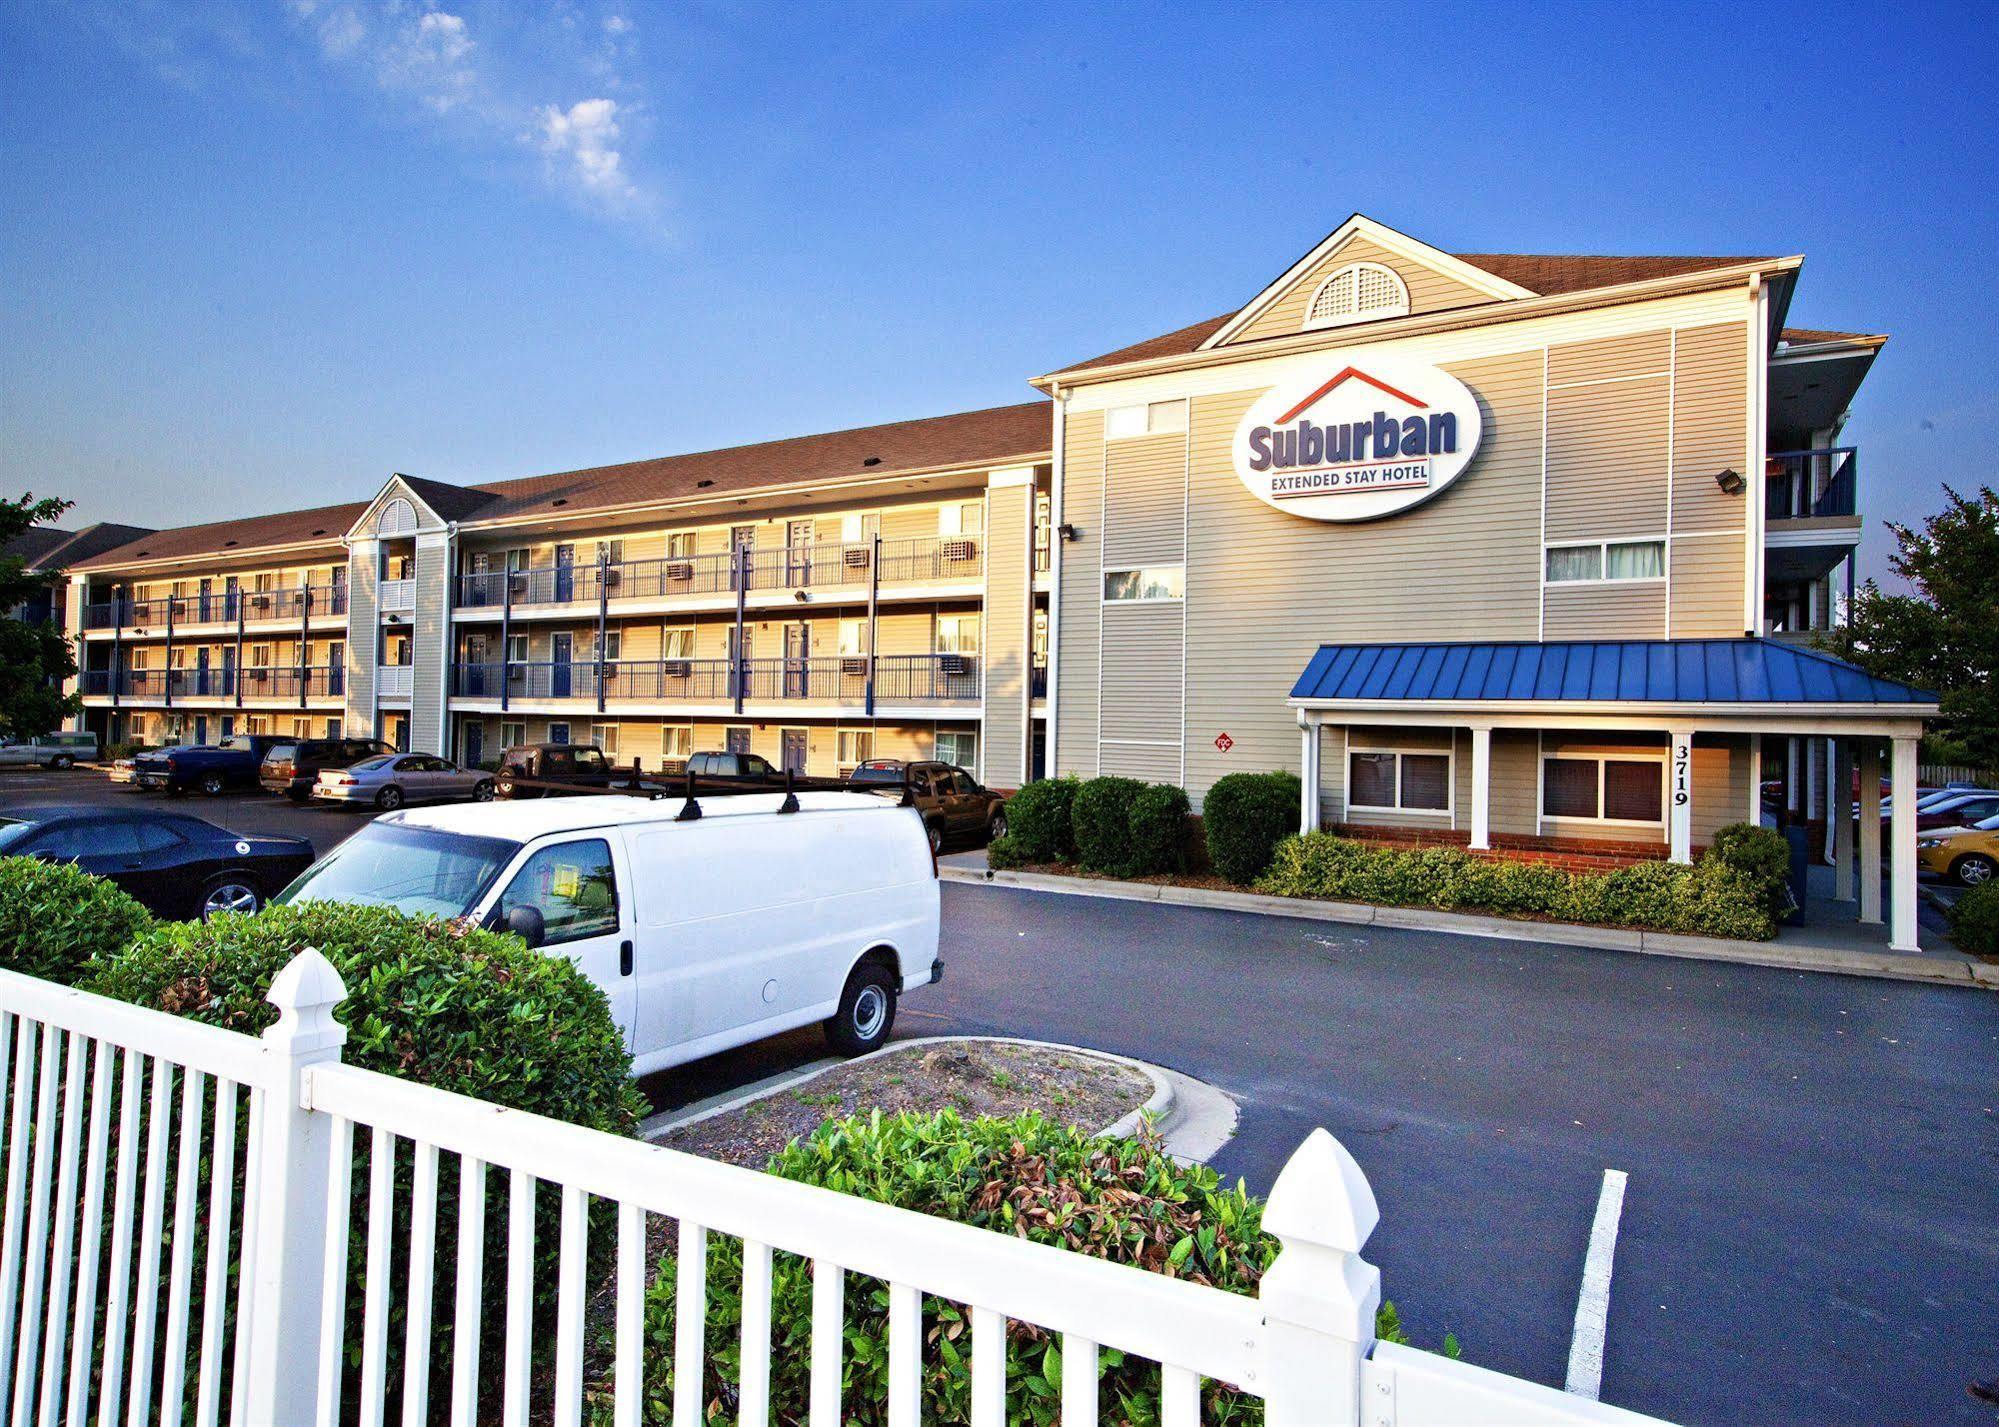 Motel 6-Fayetteville, Nc - Fort Liberty Area Exterior photo